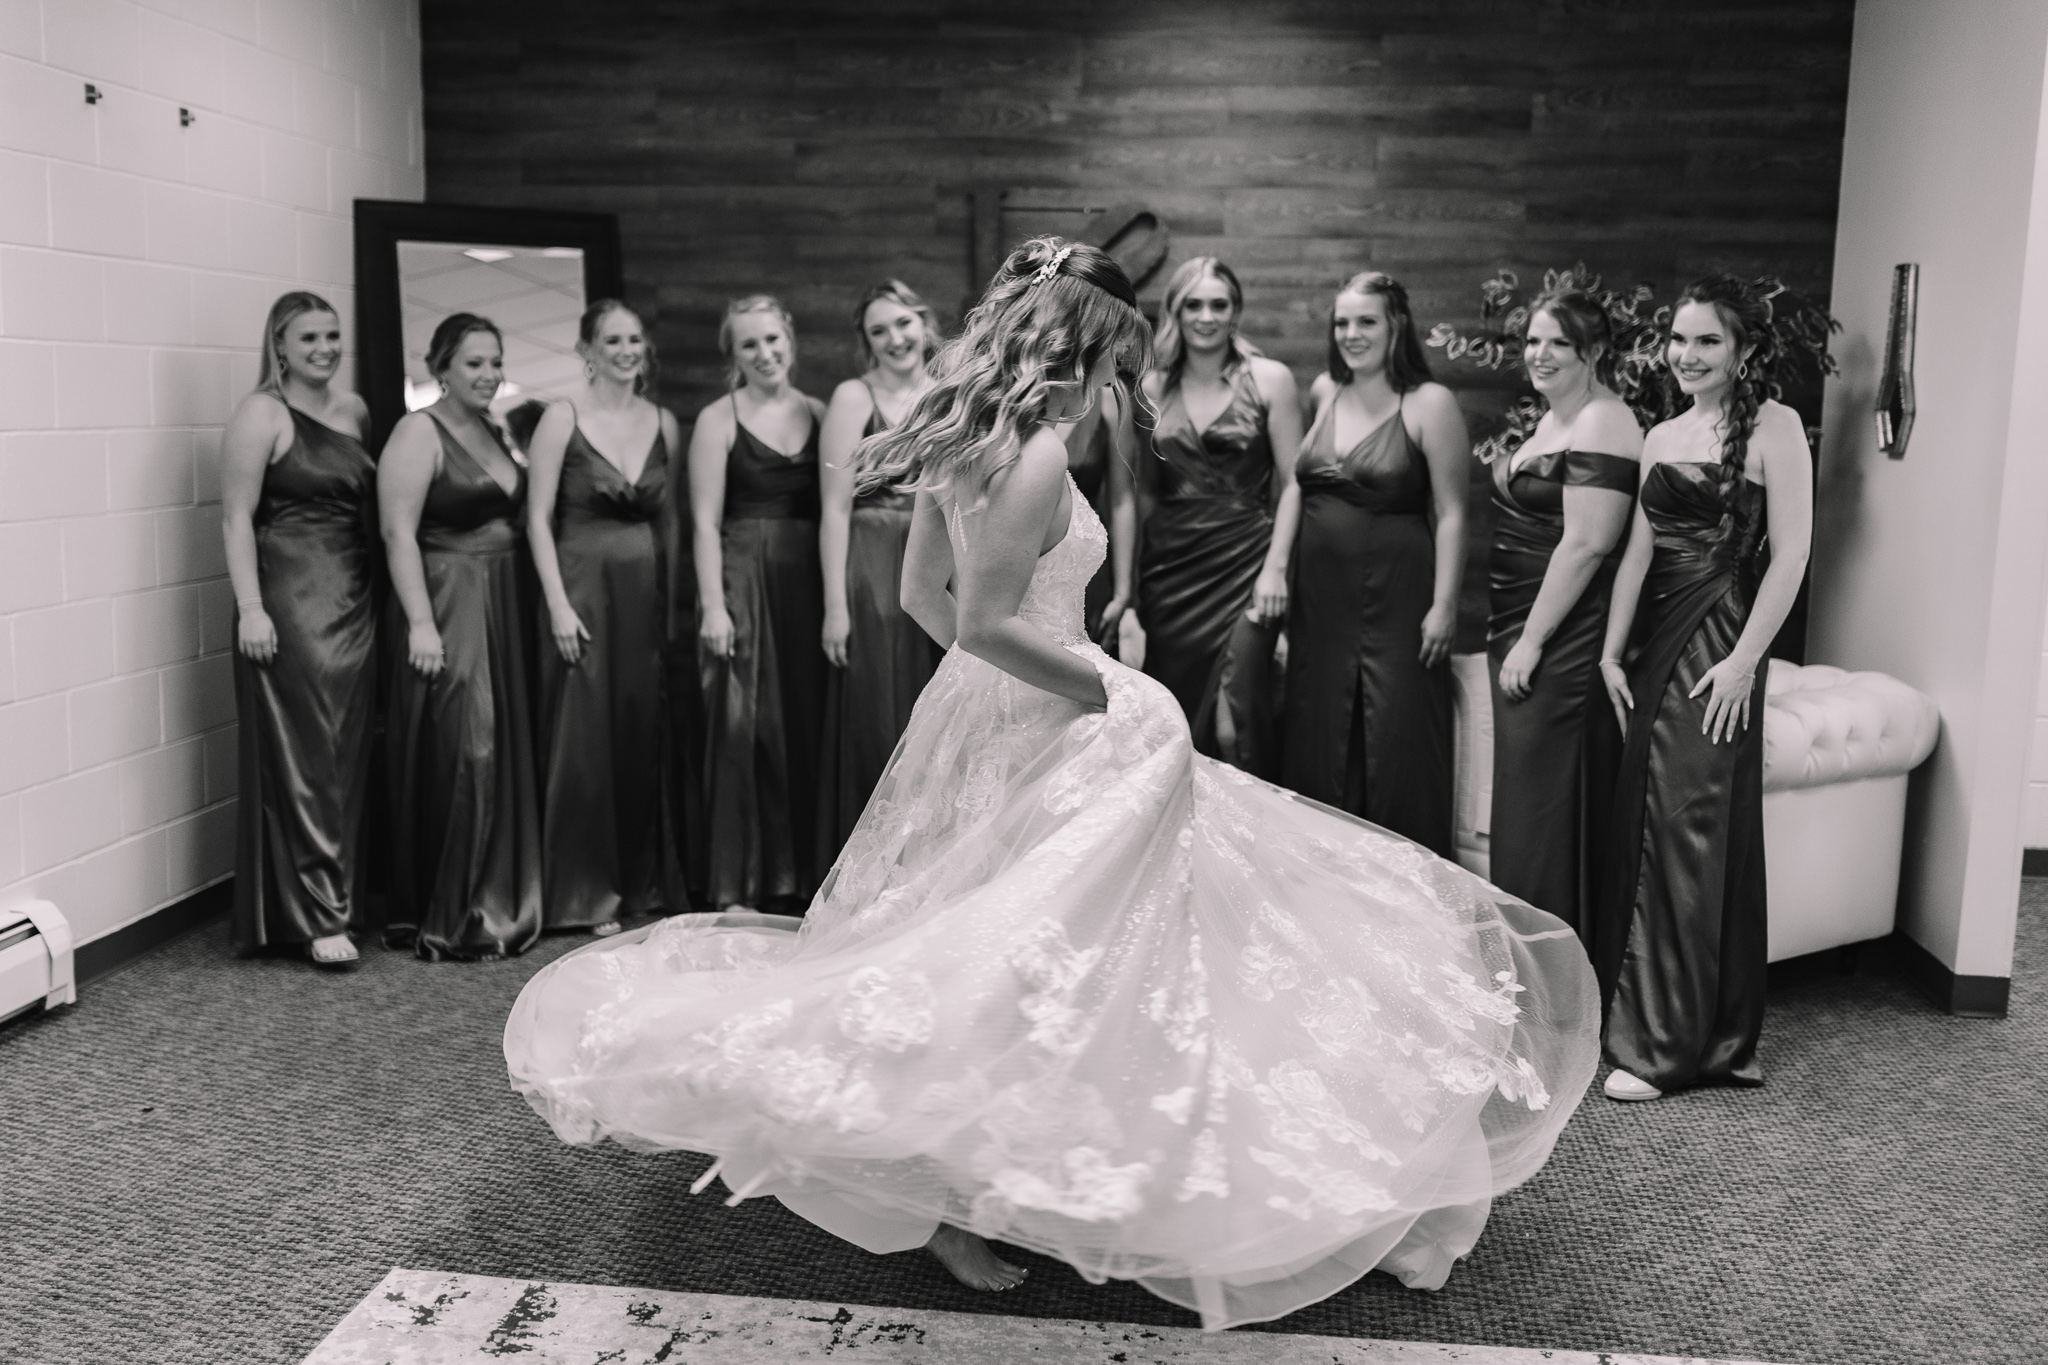 Bride twirling around showing off her wedding dress to her bridesmaids who are standing behind her admiring how beautiful she looks